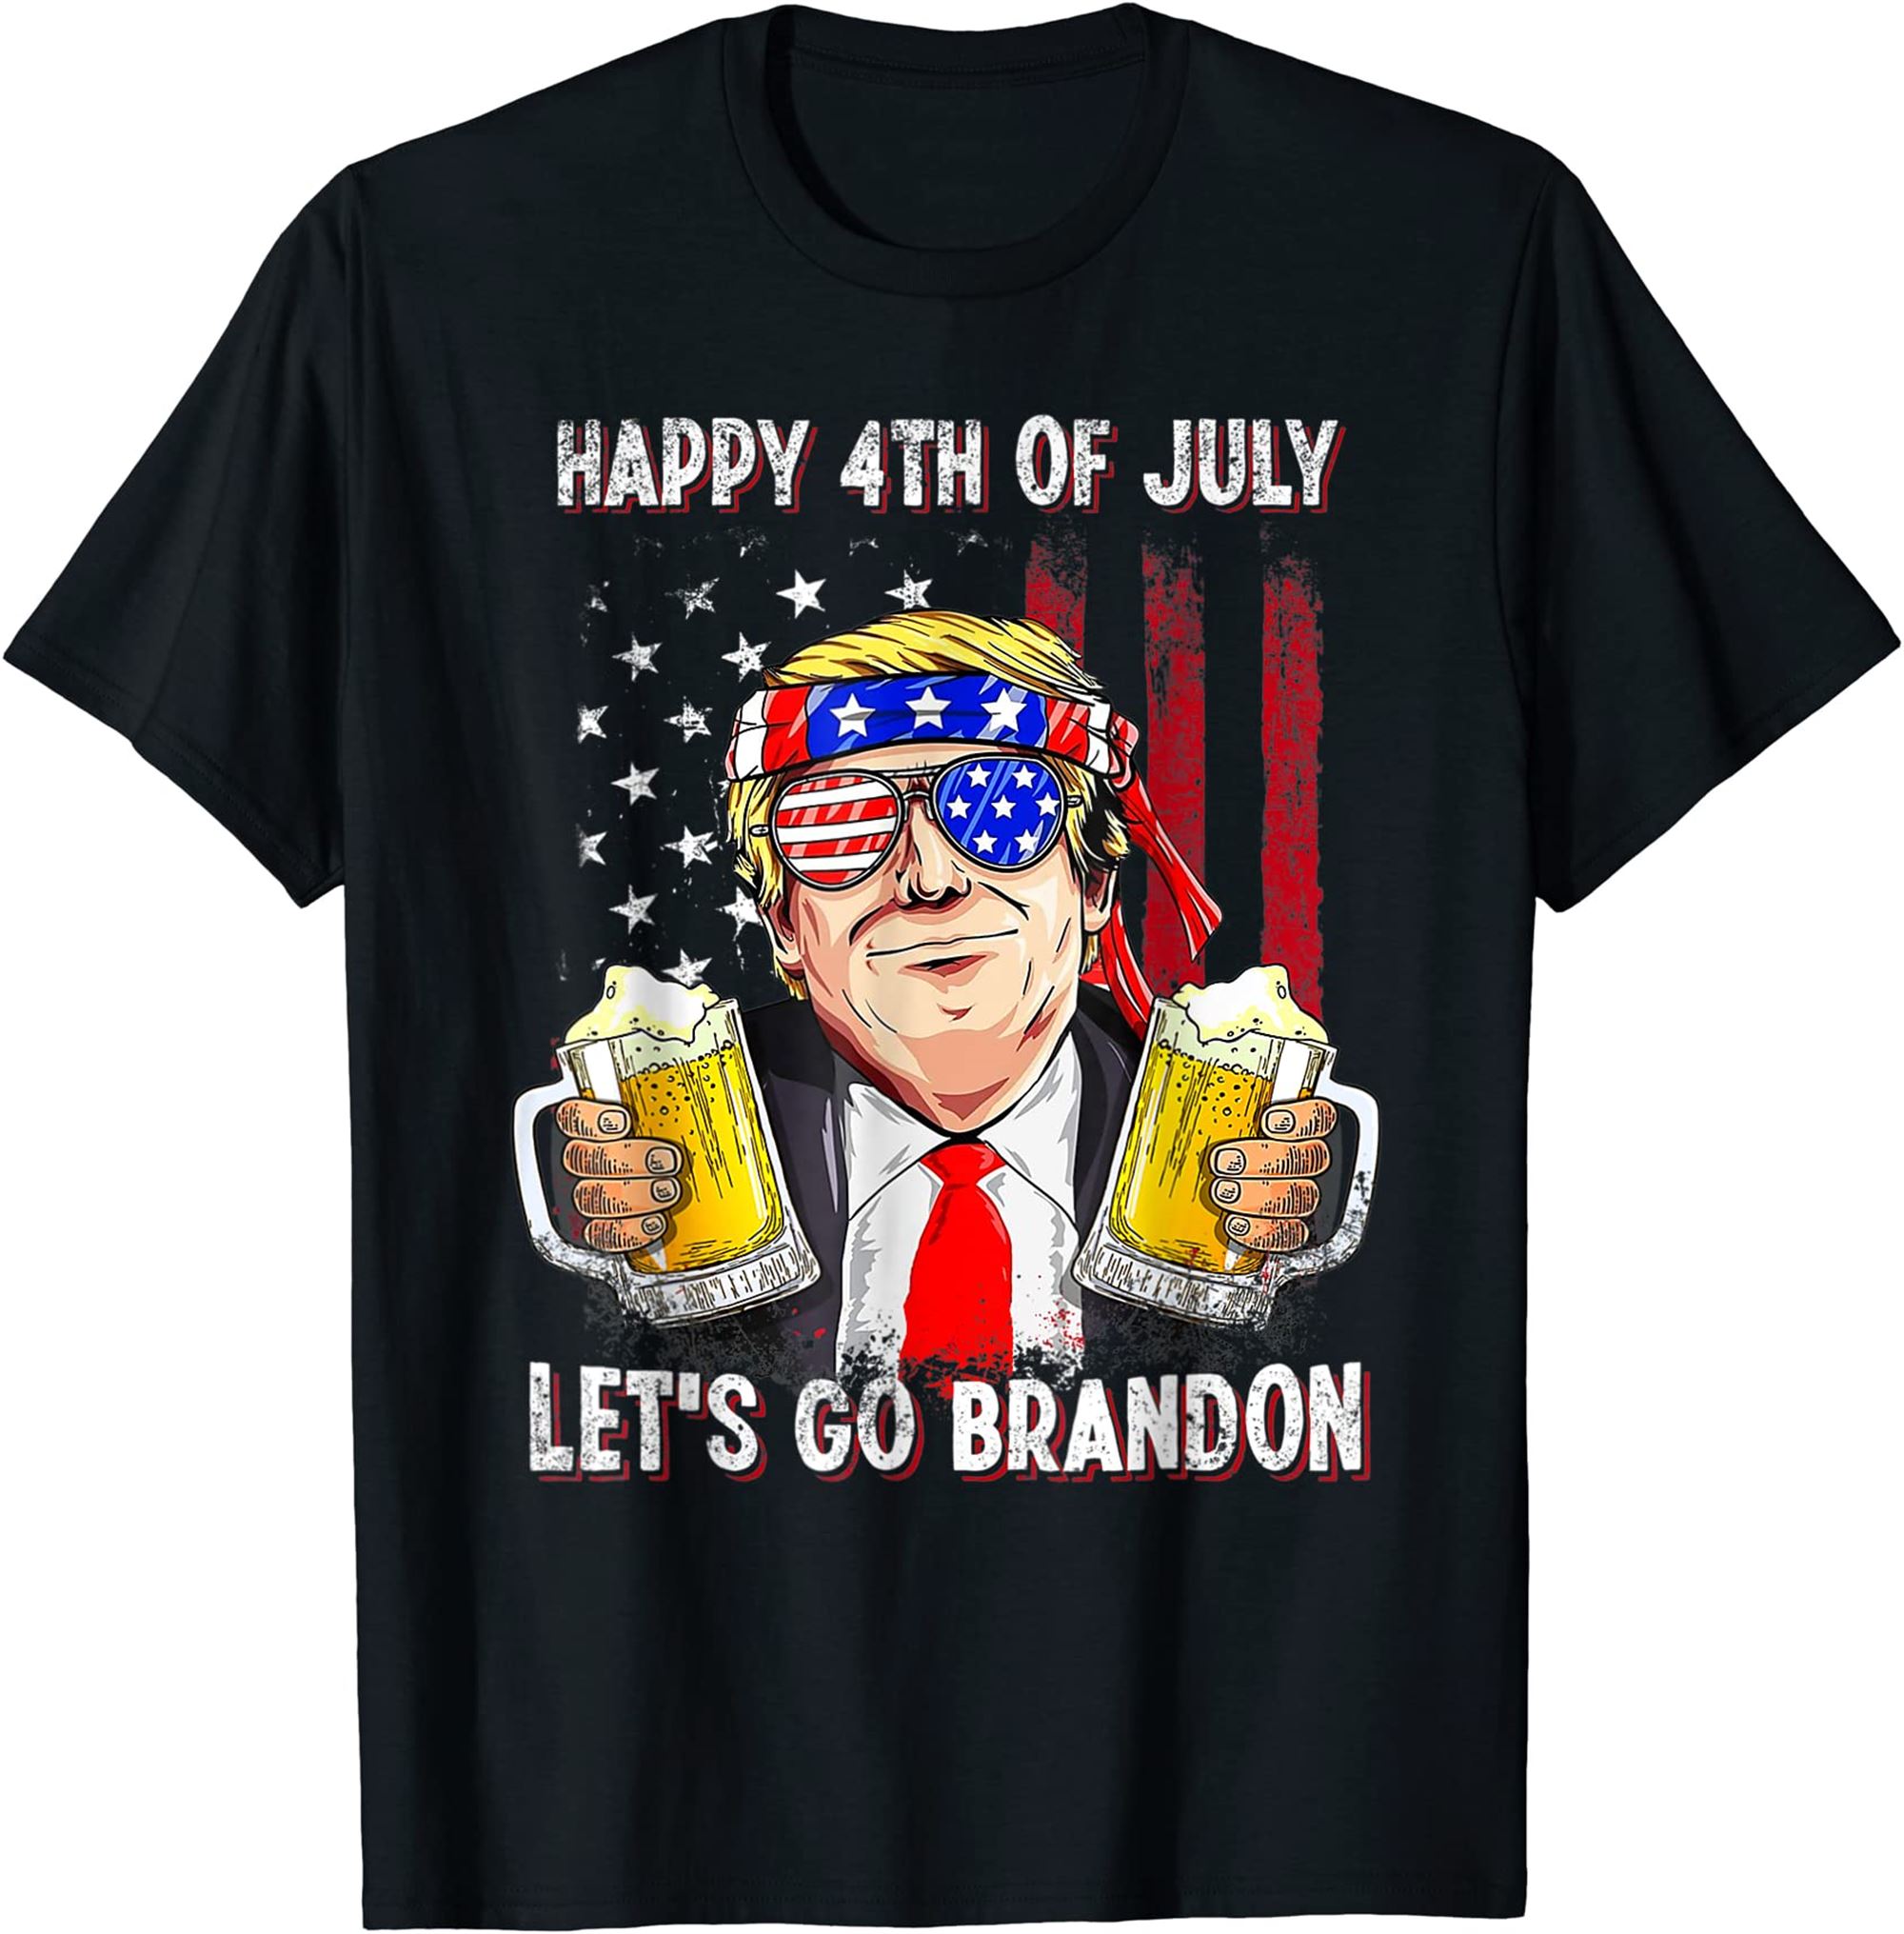 Happy 4th Of July Lets Go Beer Brandon Trump Beer America T-shirt Full Size Up To 5xl